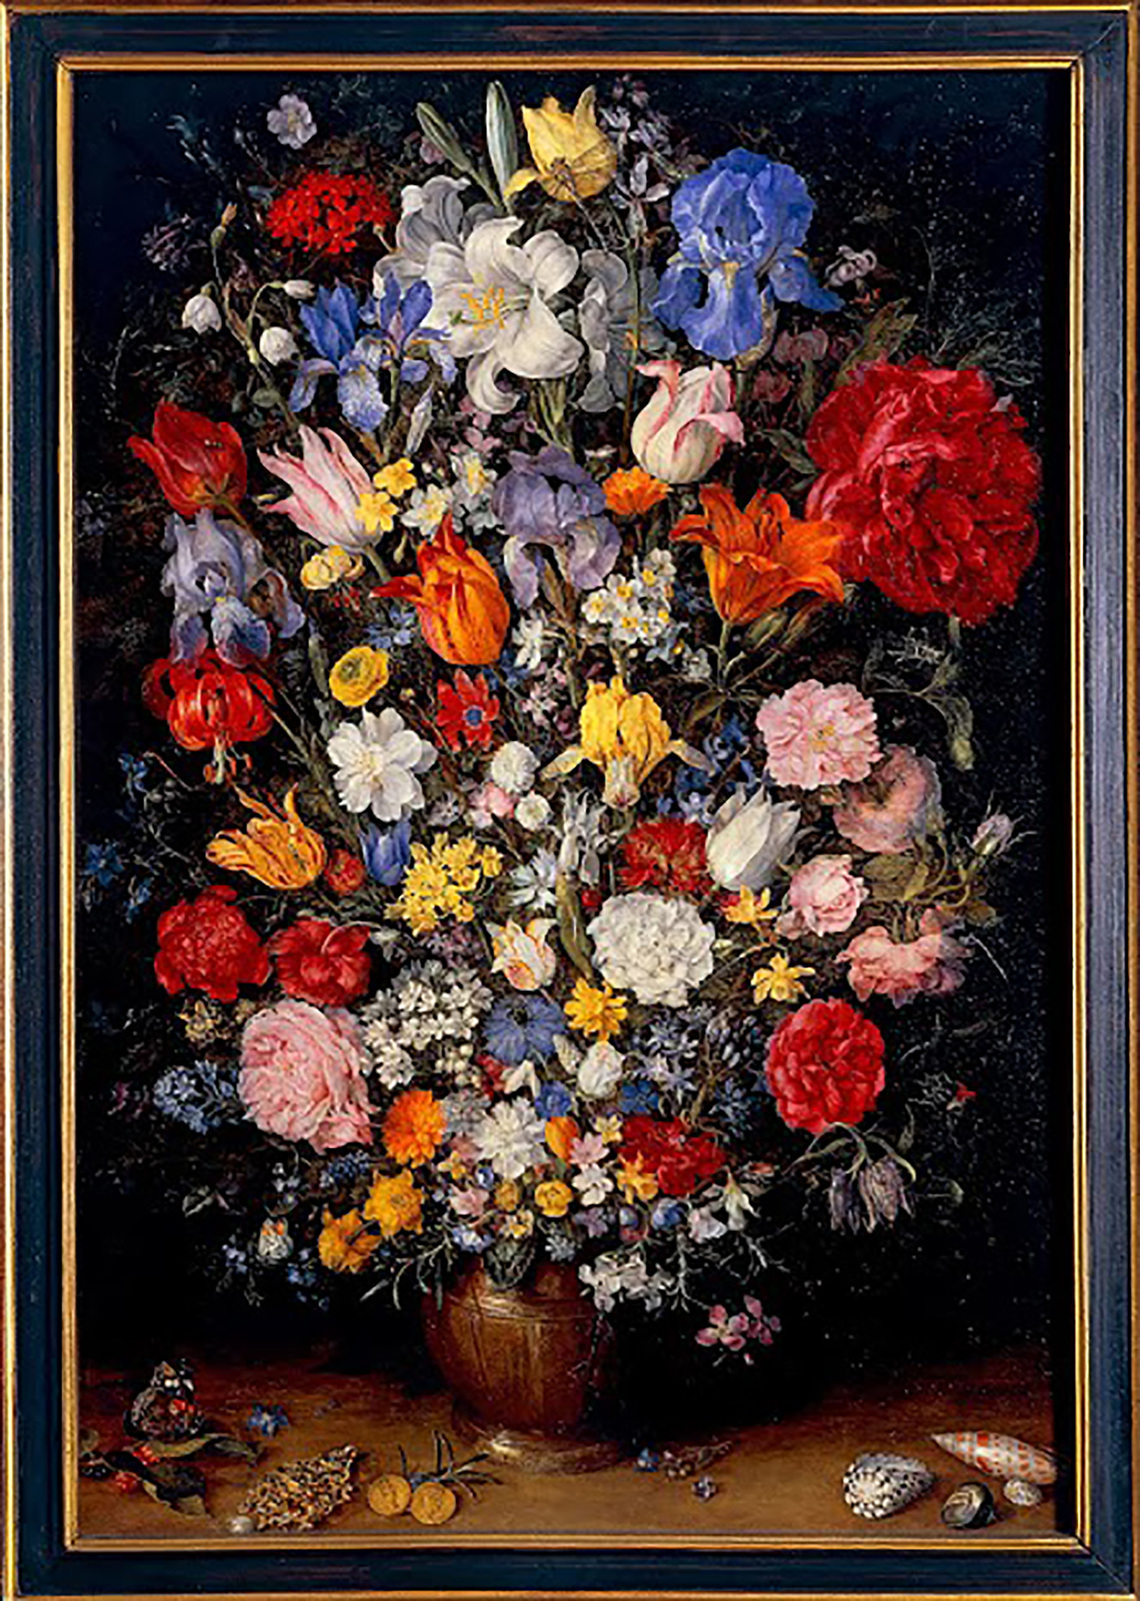 Flowers in a Vase with Jewels, Coins, and Shells (Milan)